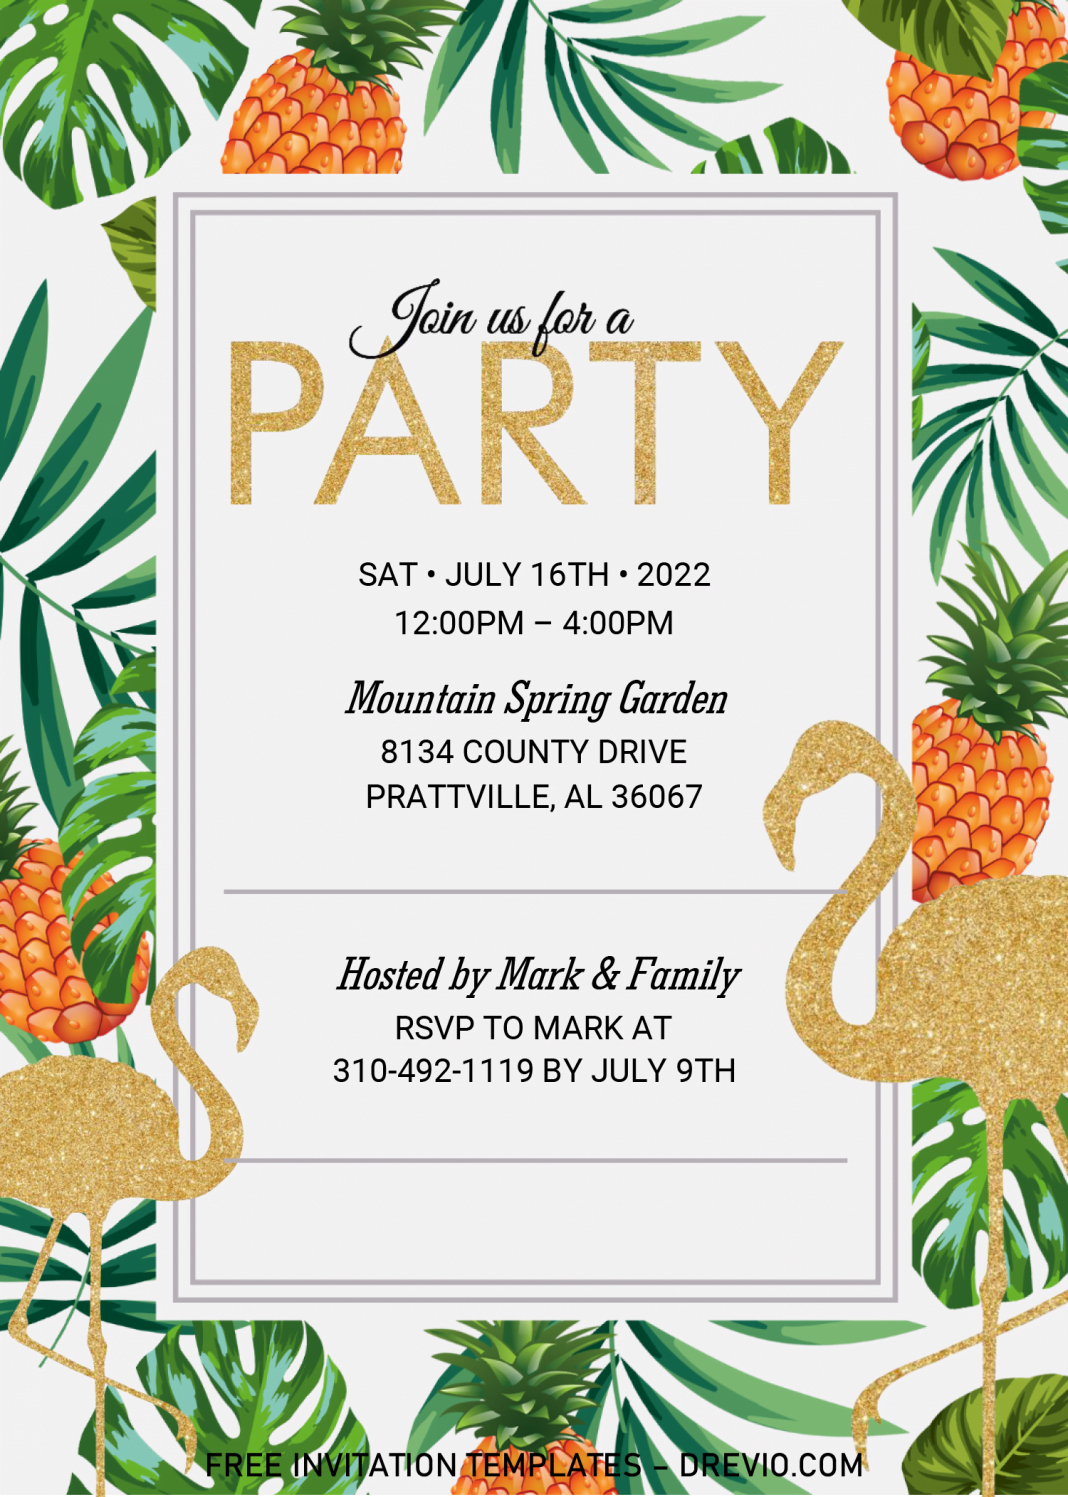 Summer Party Invitation Templates – Editable With MS Word | Download ...